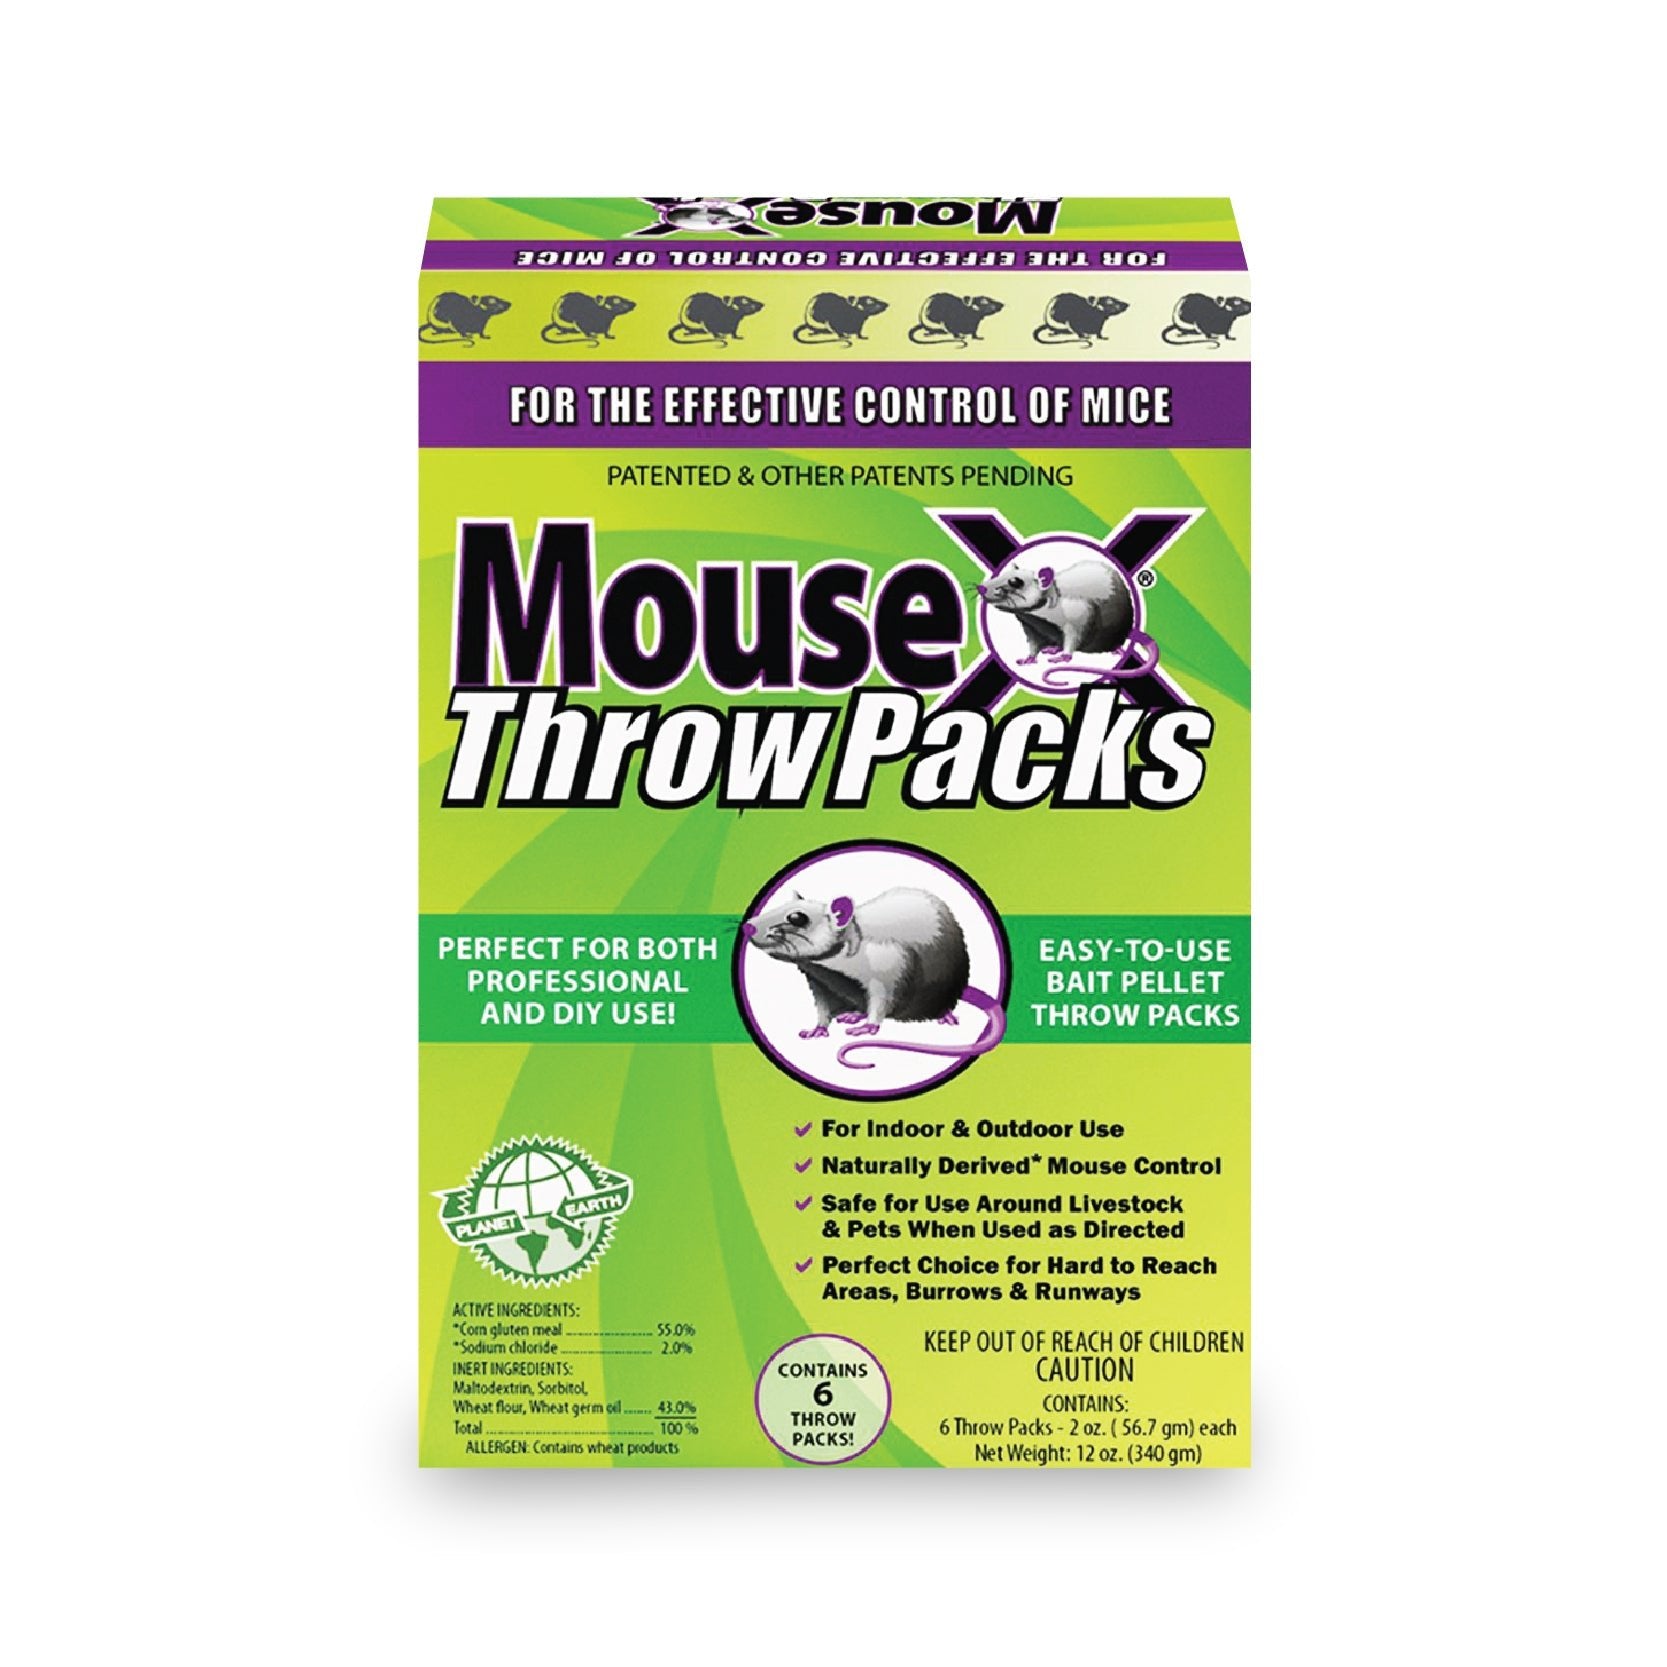 MouseX® Throw Packs